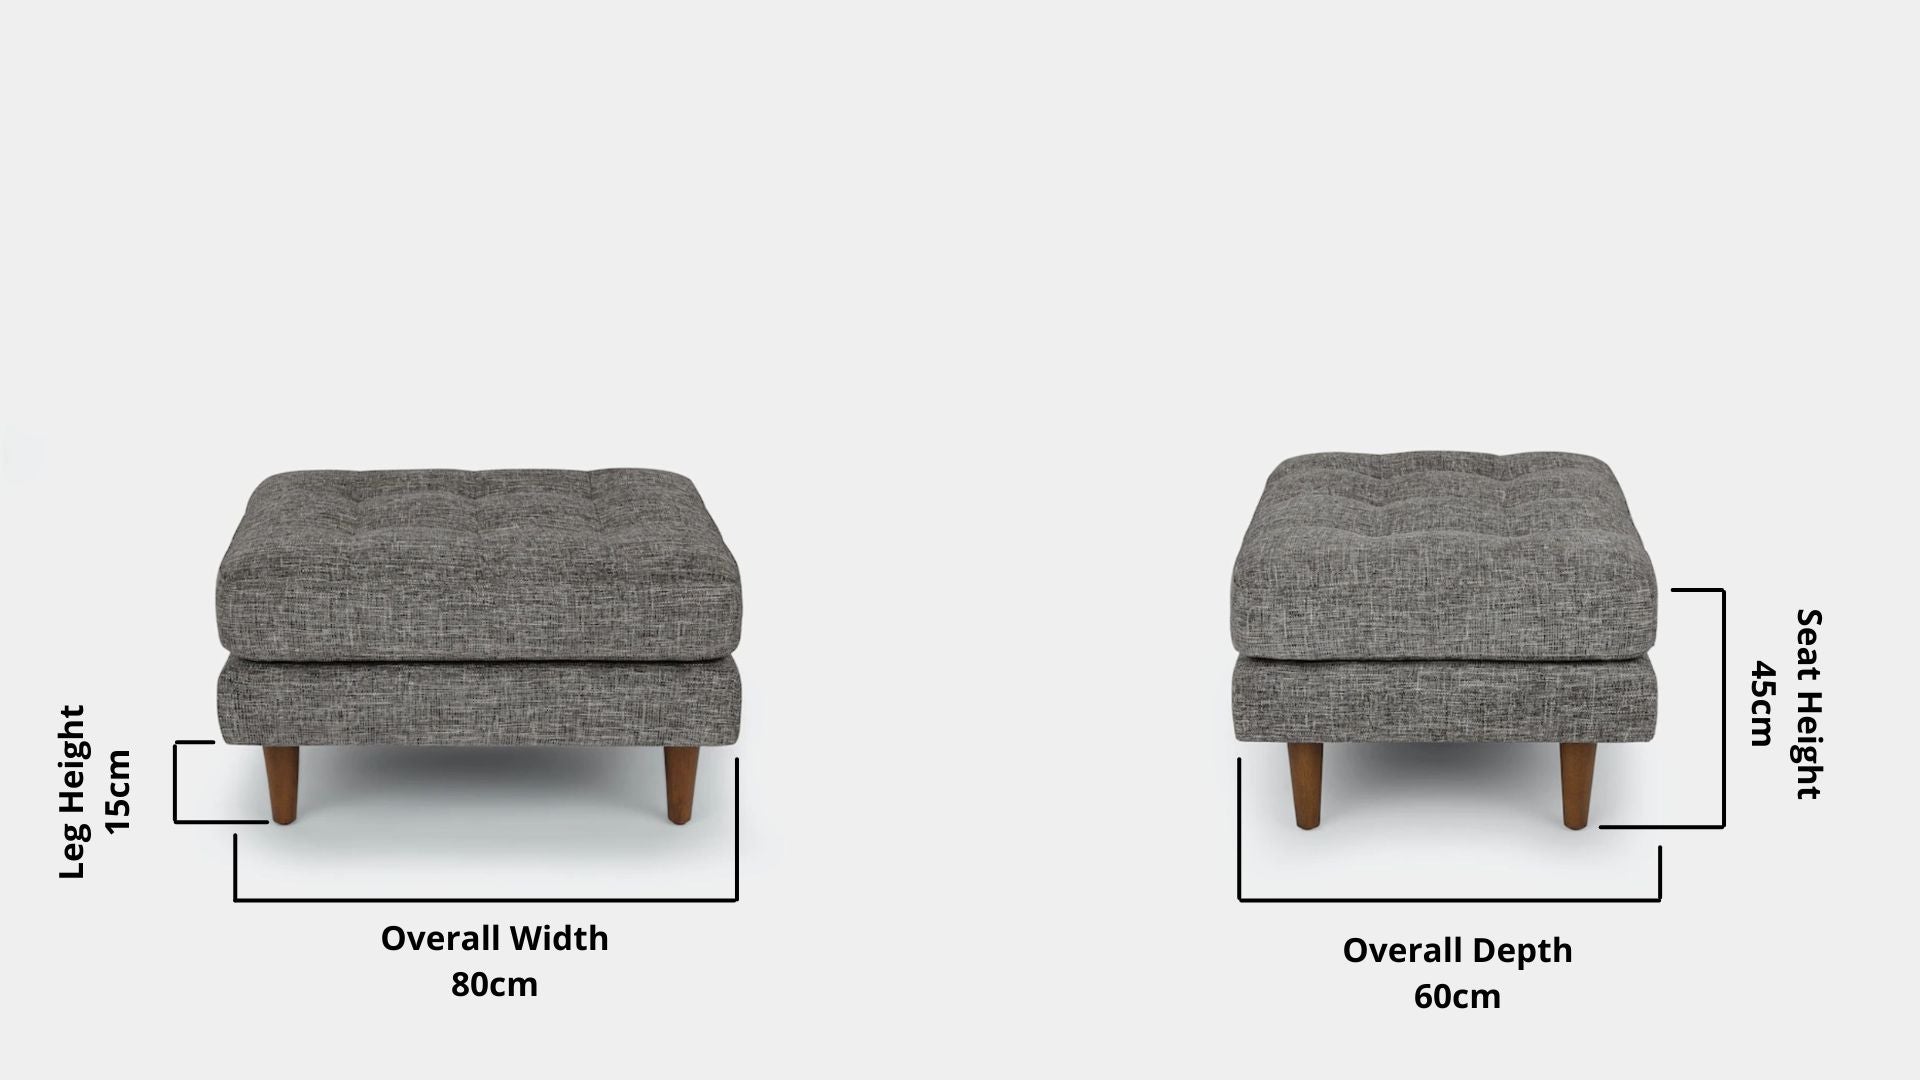 Details the key dimensions in terms of overall width, overall depth and seat width for Castle Fabric Ottoman